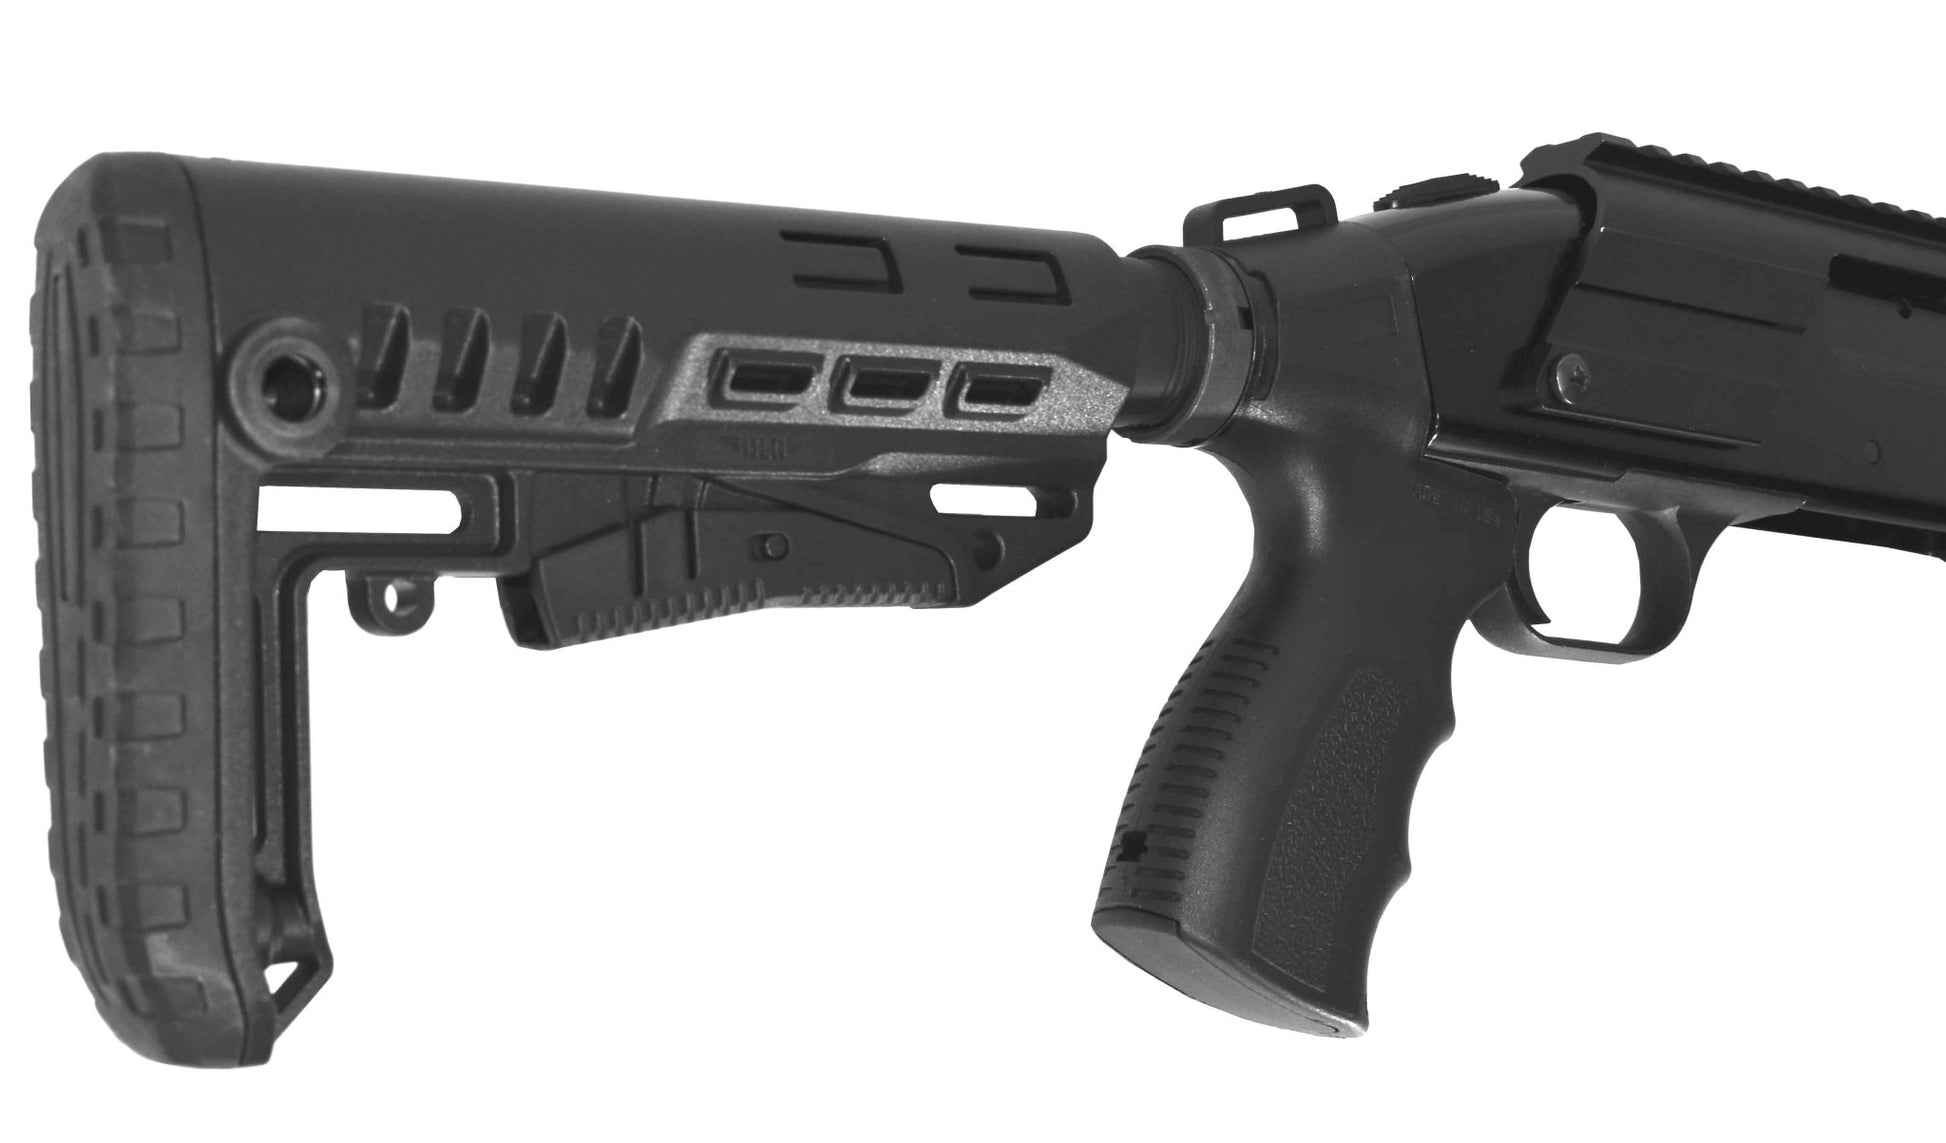 Tactical Insane Stock Compatible With Mossberg 500 12 Gauge Pump. - TRINITY SUPPLY INC